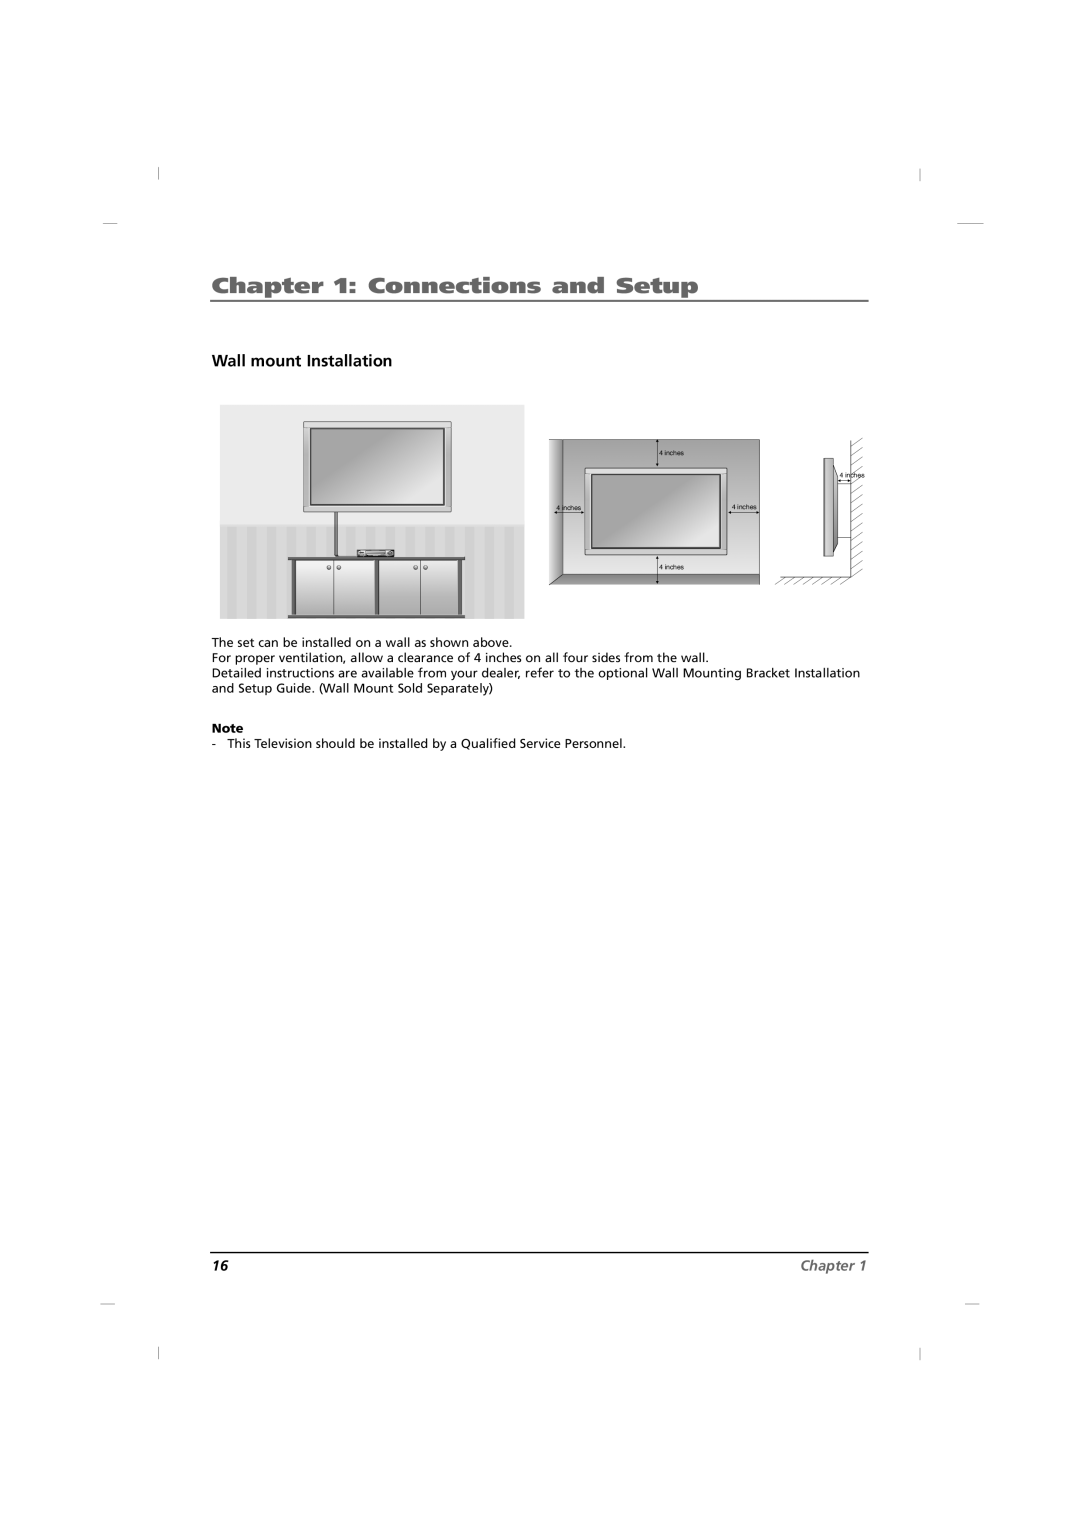 RCA J32CE720, J42CE820, J26CE820 manual Wall mount Installation, Connections and Setup, Chapter 